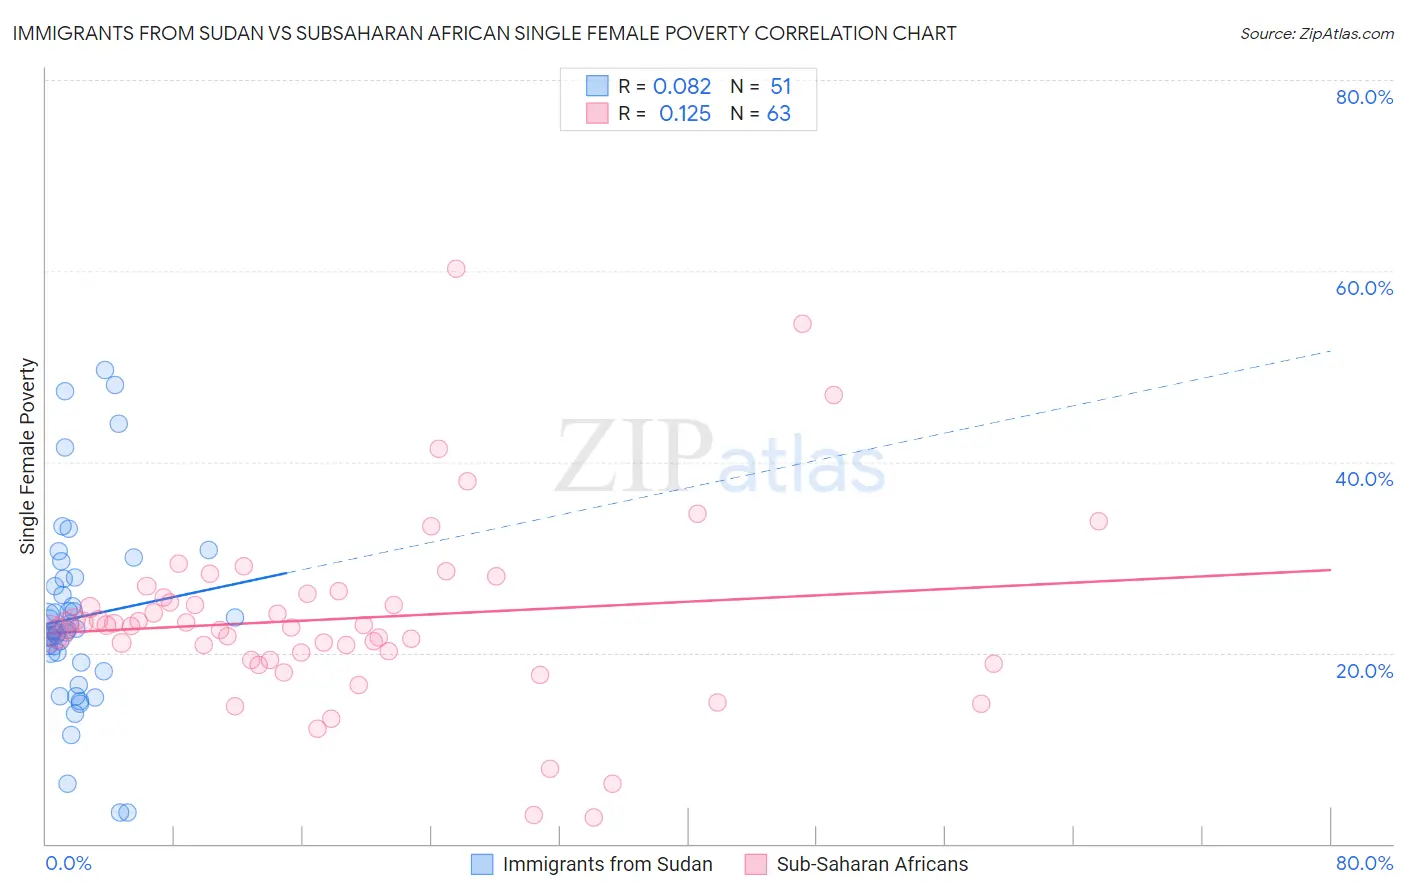 Immigrants from Sudan vs Subsaharan African Single Female Poverty